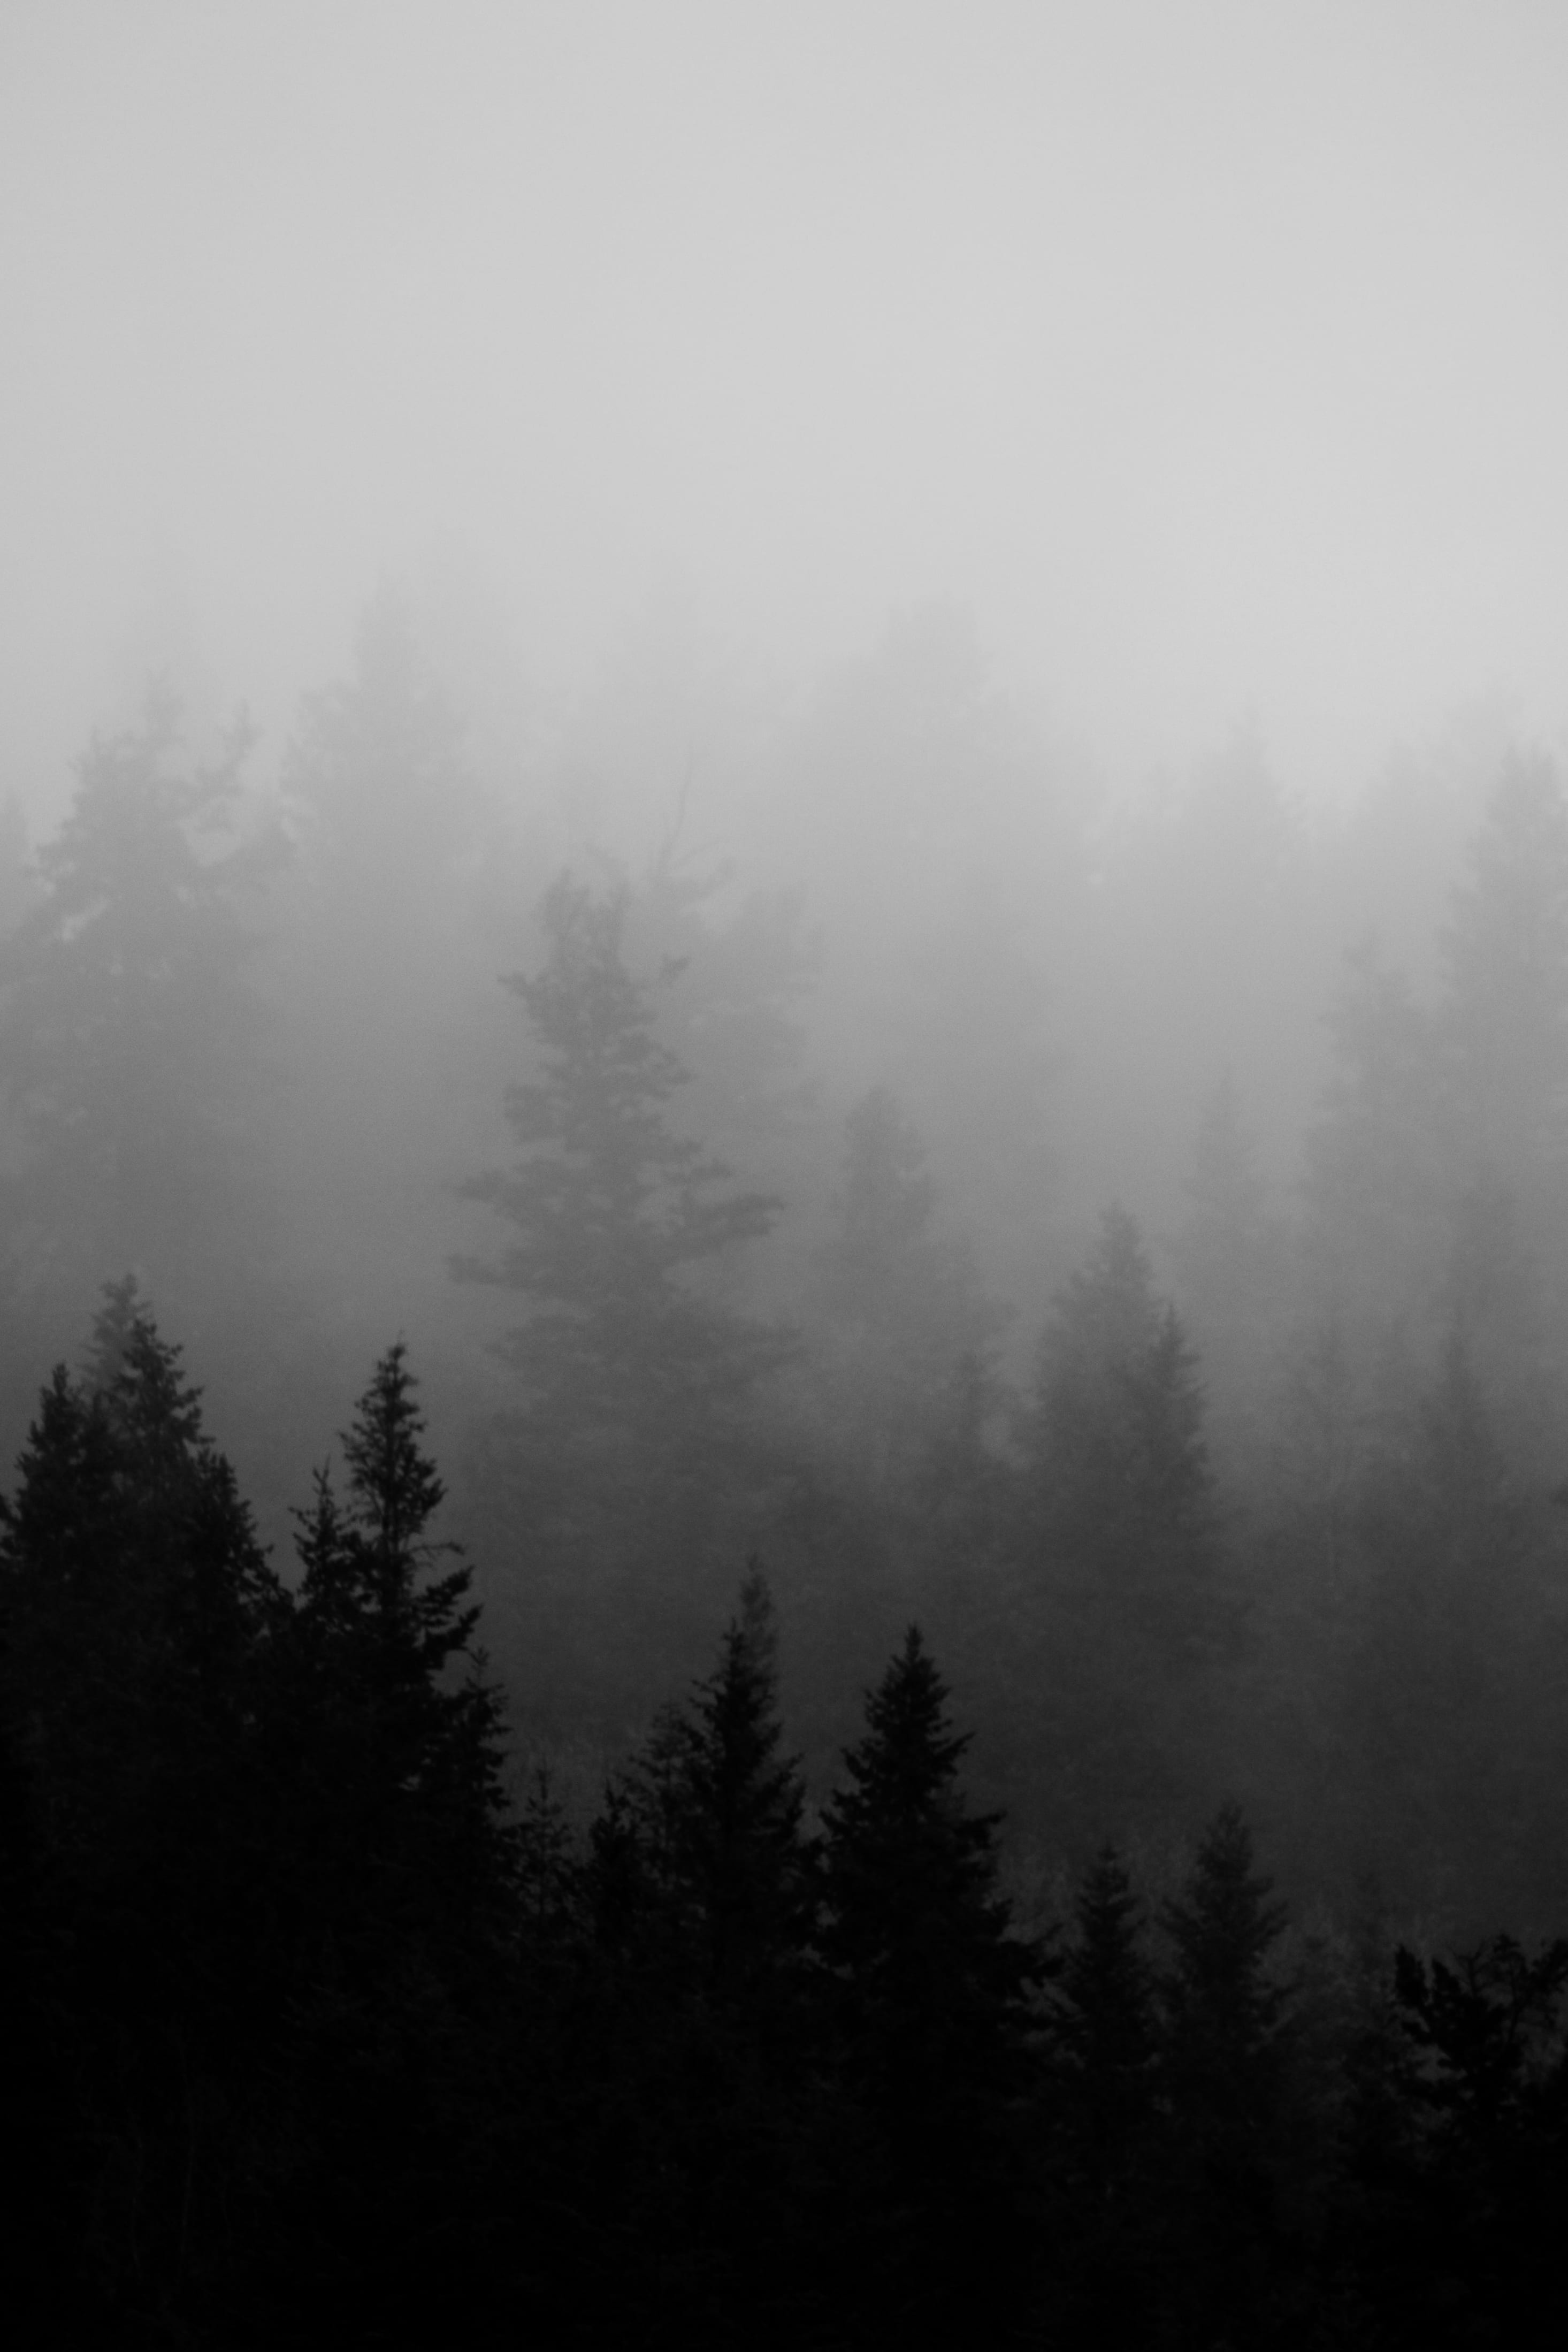 Free Download Hd Wallpaper Foggy Pine Tree Forest Spruce Trees